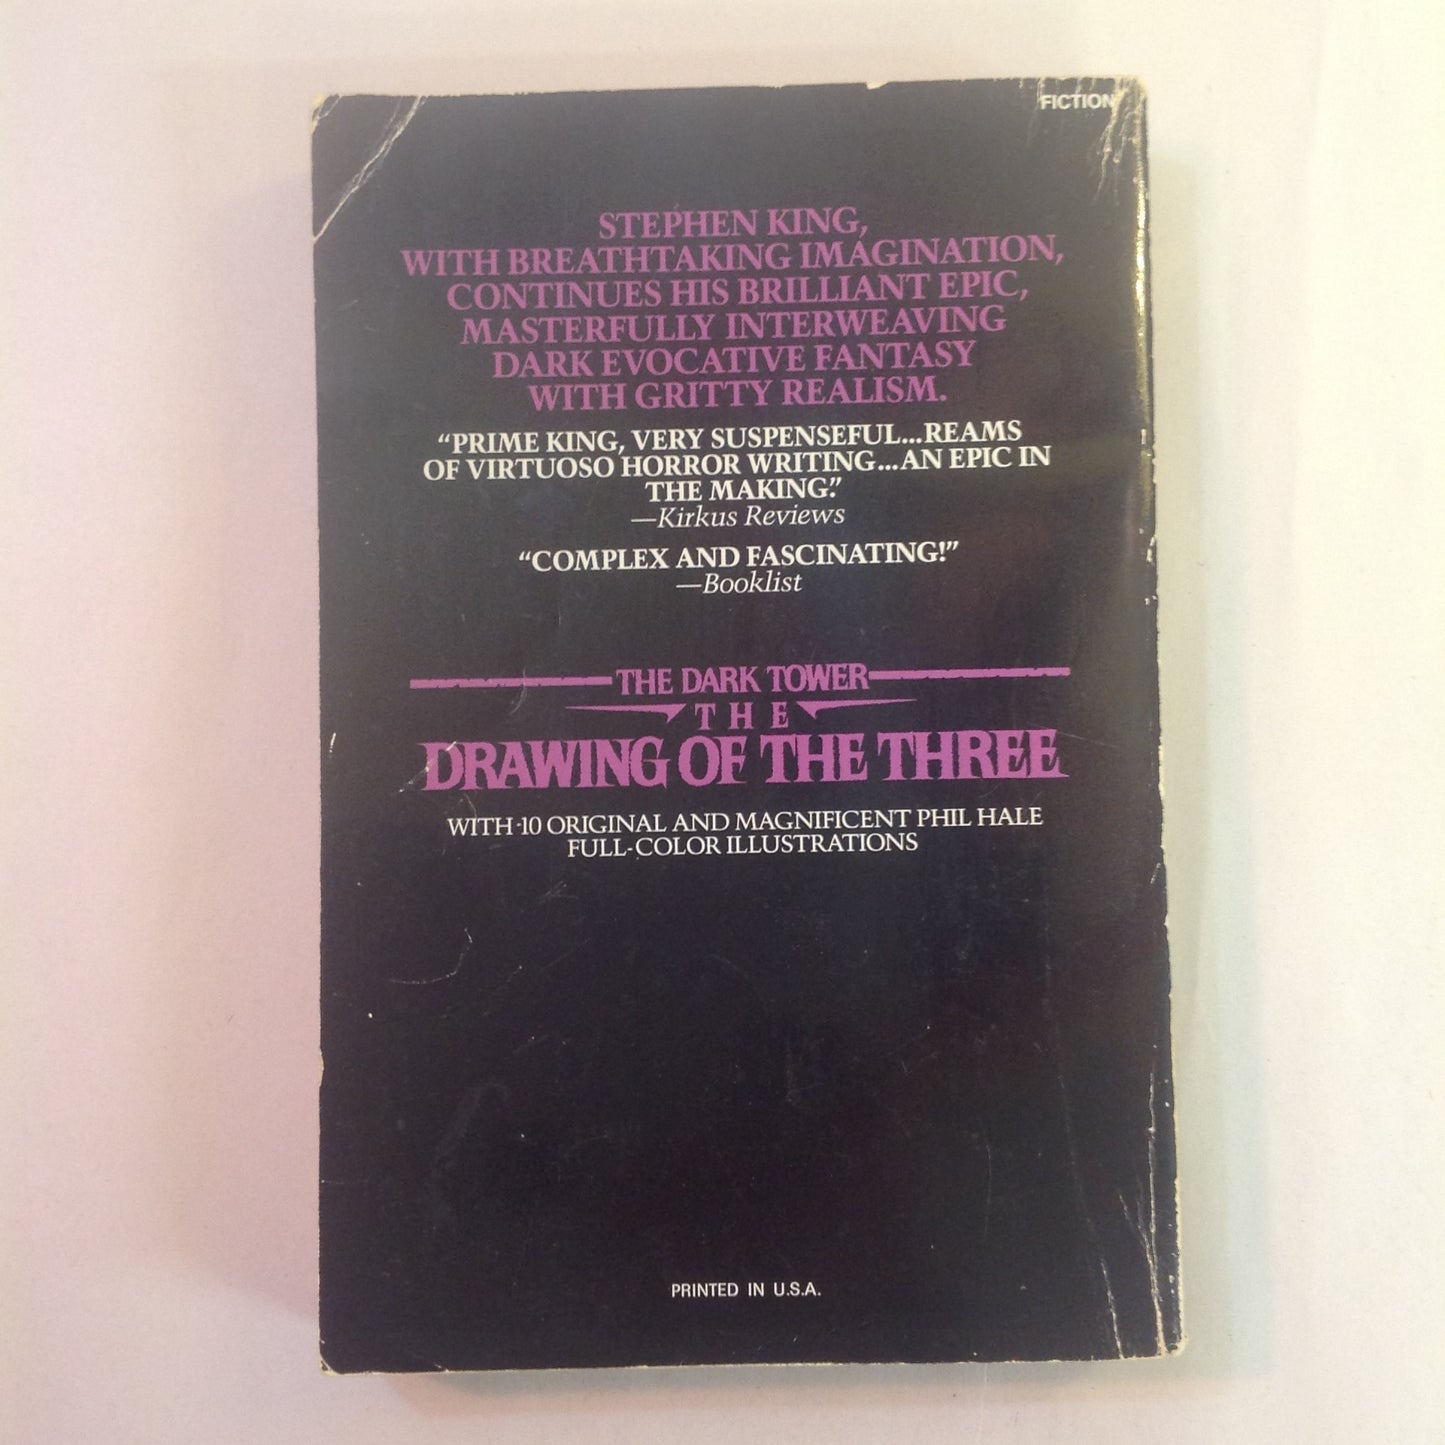 Vintage 1987 Trade Paperback The Dark Tower II: The Drawing of the Three Stephen King